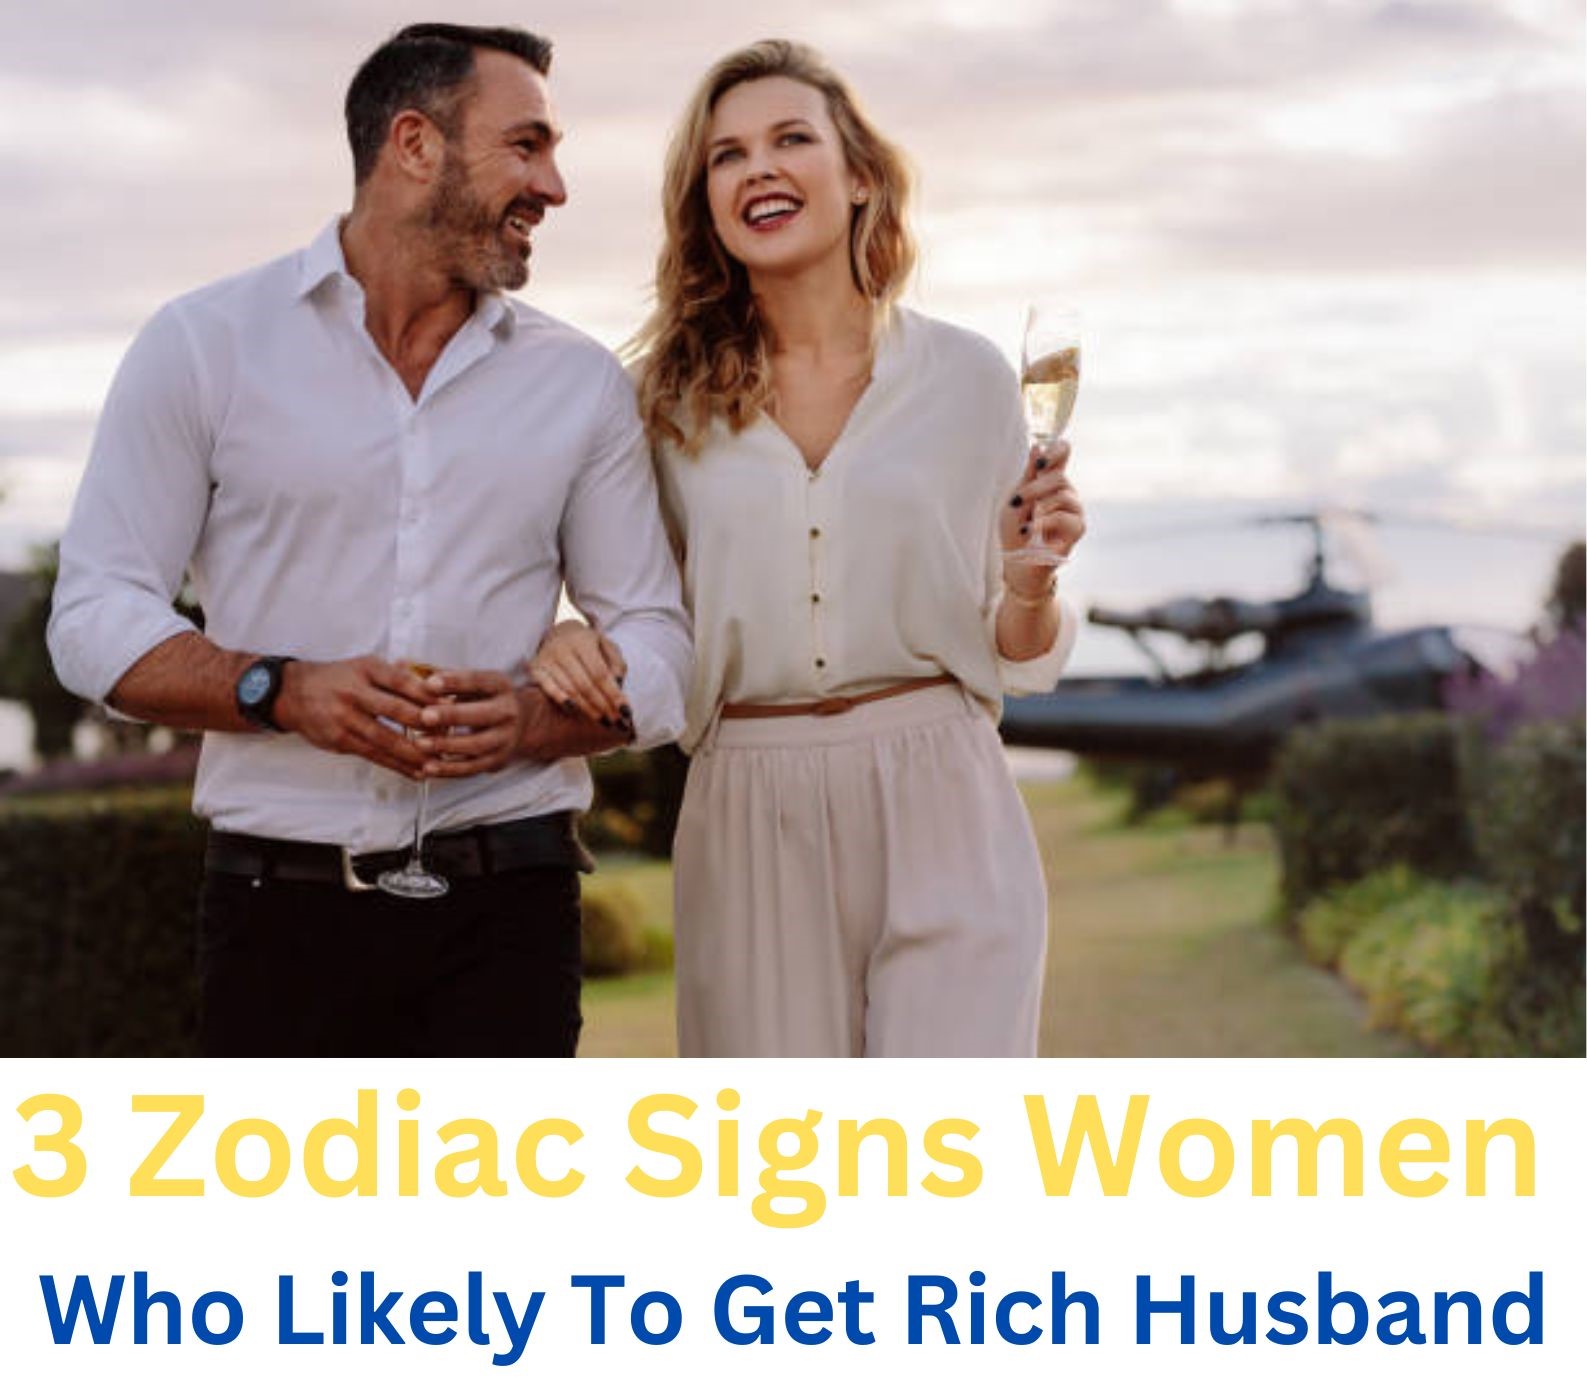 3 Zodiac Signs Women Who Likely To Get Rich Husband